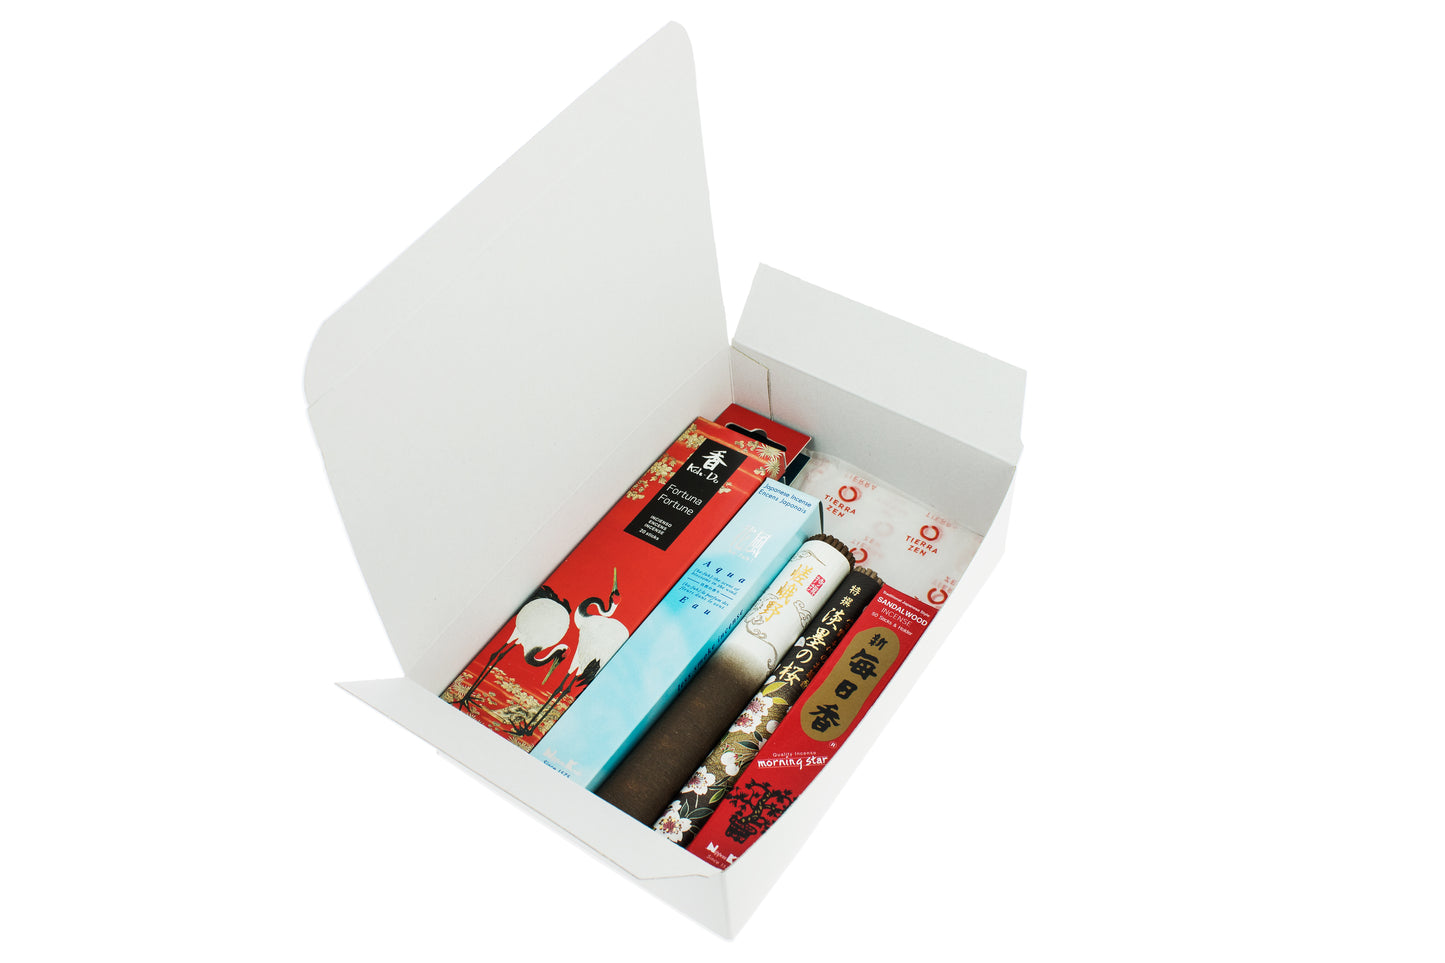 Japanese Incense - Introduction Pack